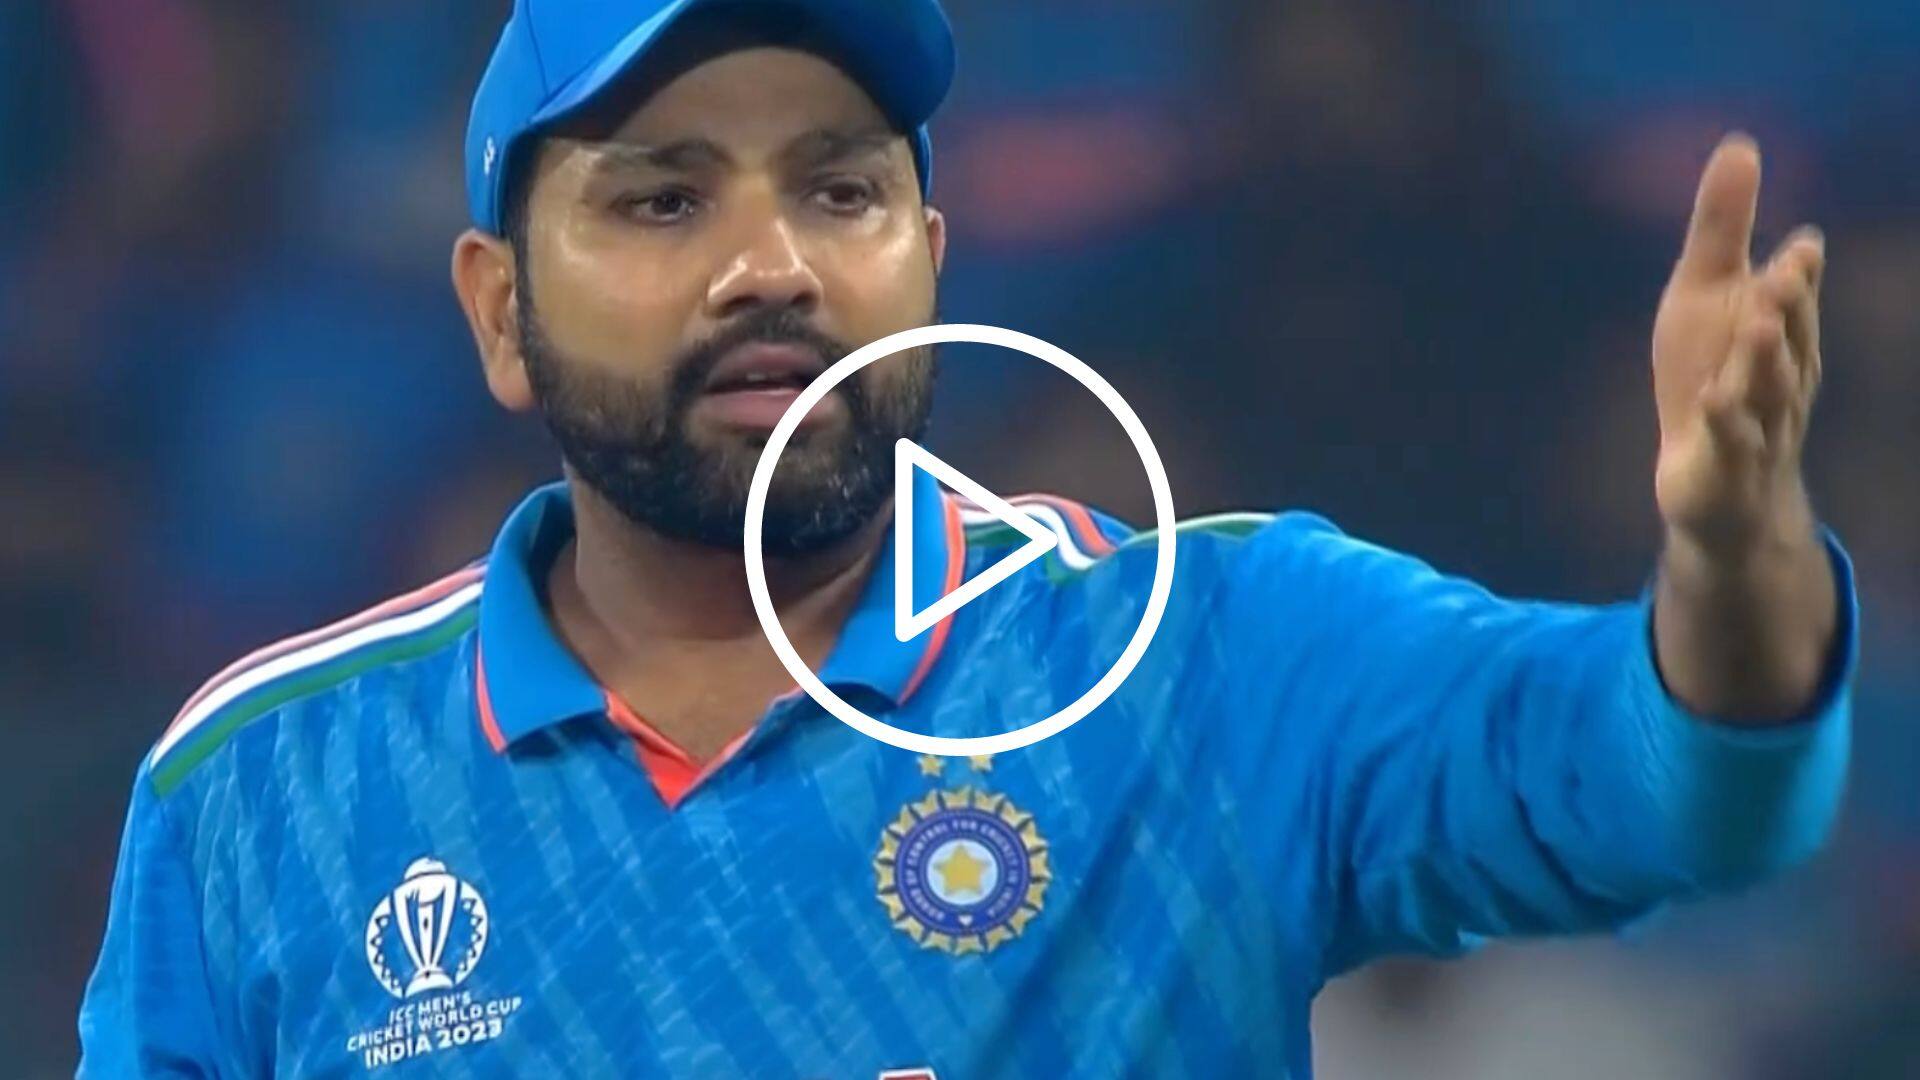 [Watch] Furious Rohit Sharma 'Abuses' Mohammed Siraj For His Fielding Blunder